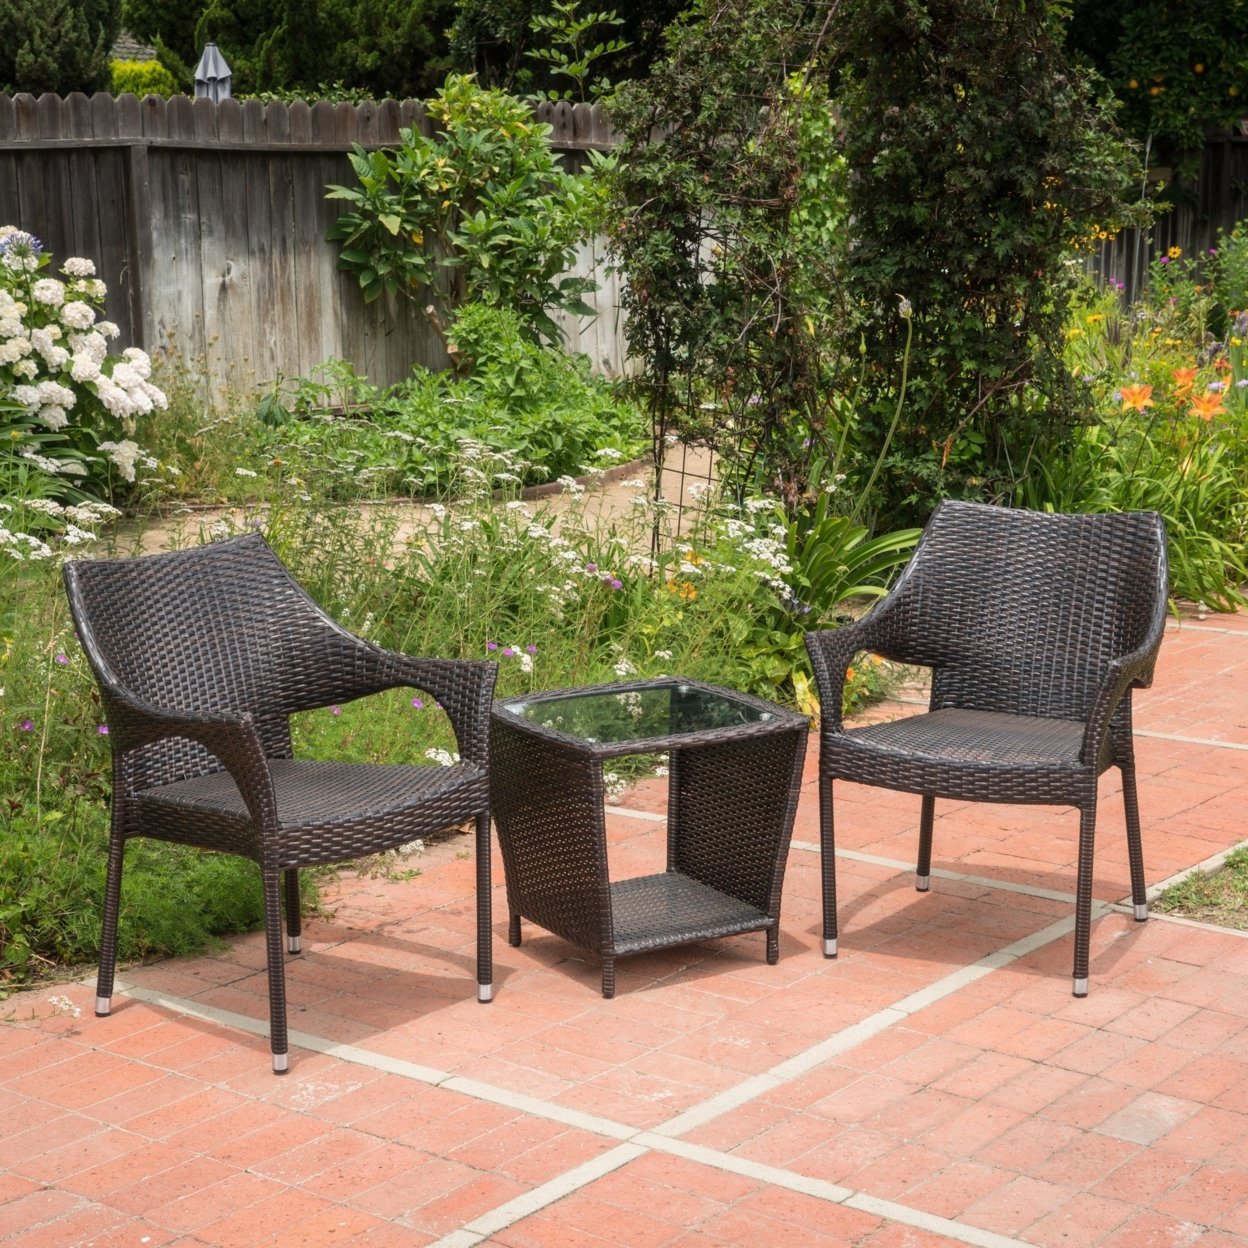 Alfheimr Outdoor 3 Piece Multi-brown Wicker Stacking Chair Chat Set - Box Table